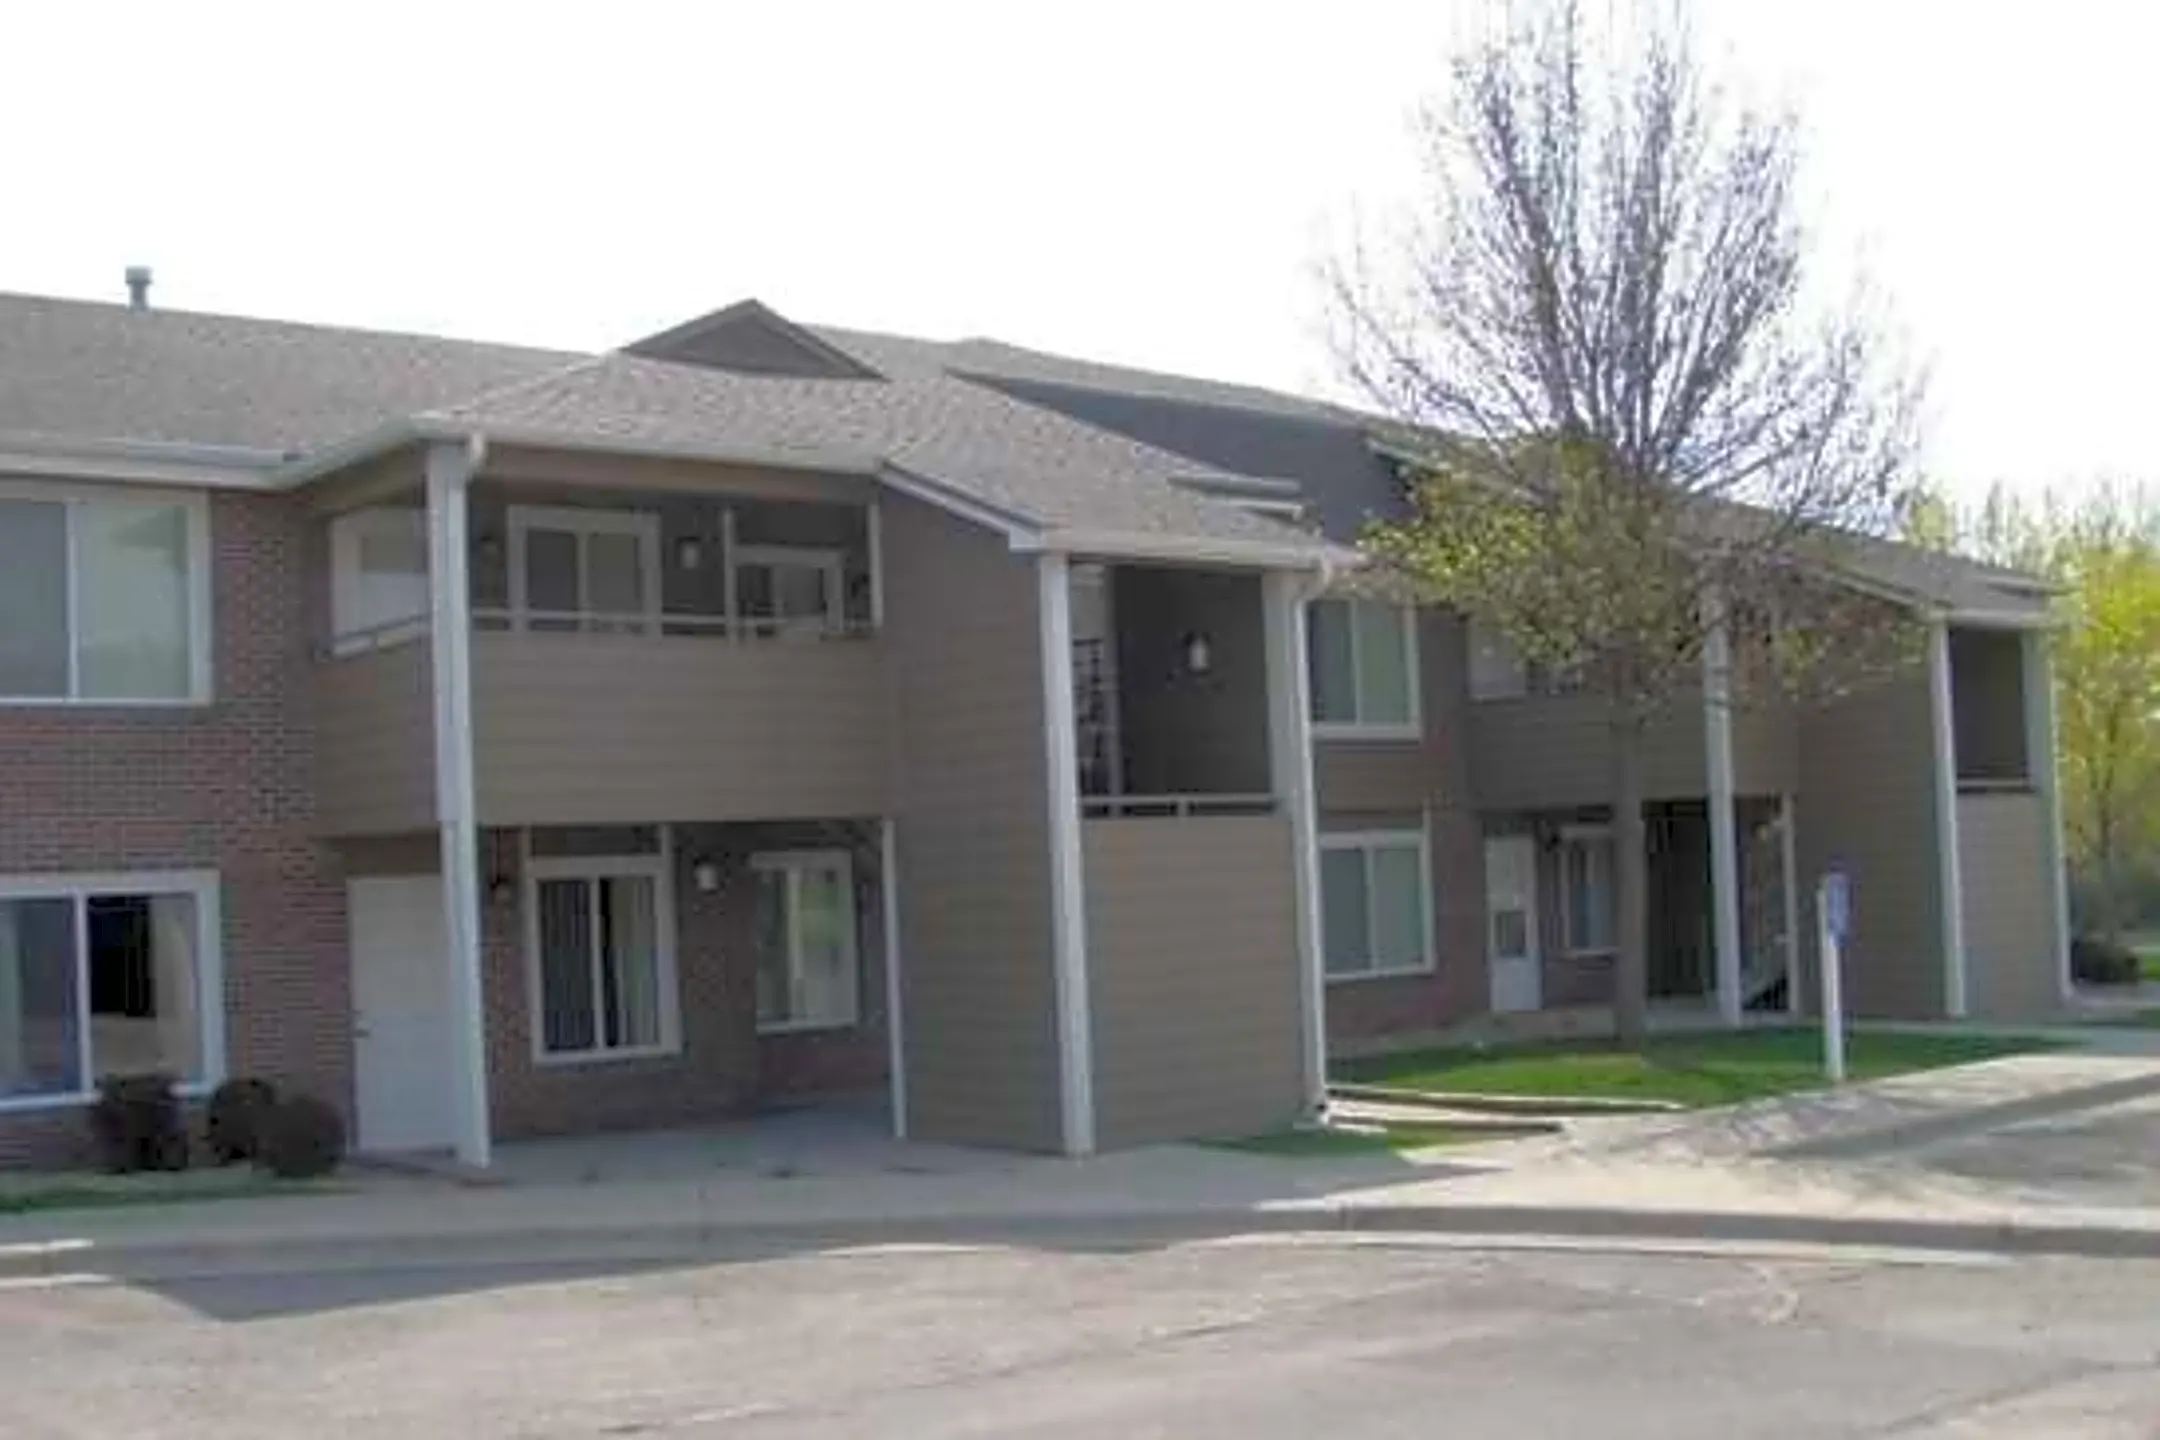 Country Meadows Apartments - Sioux Falls, SD